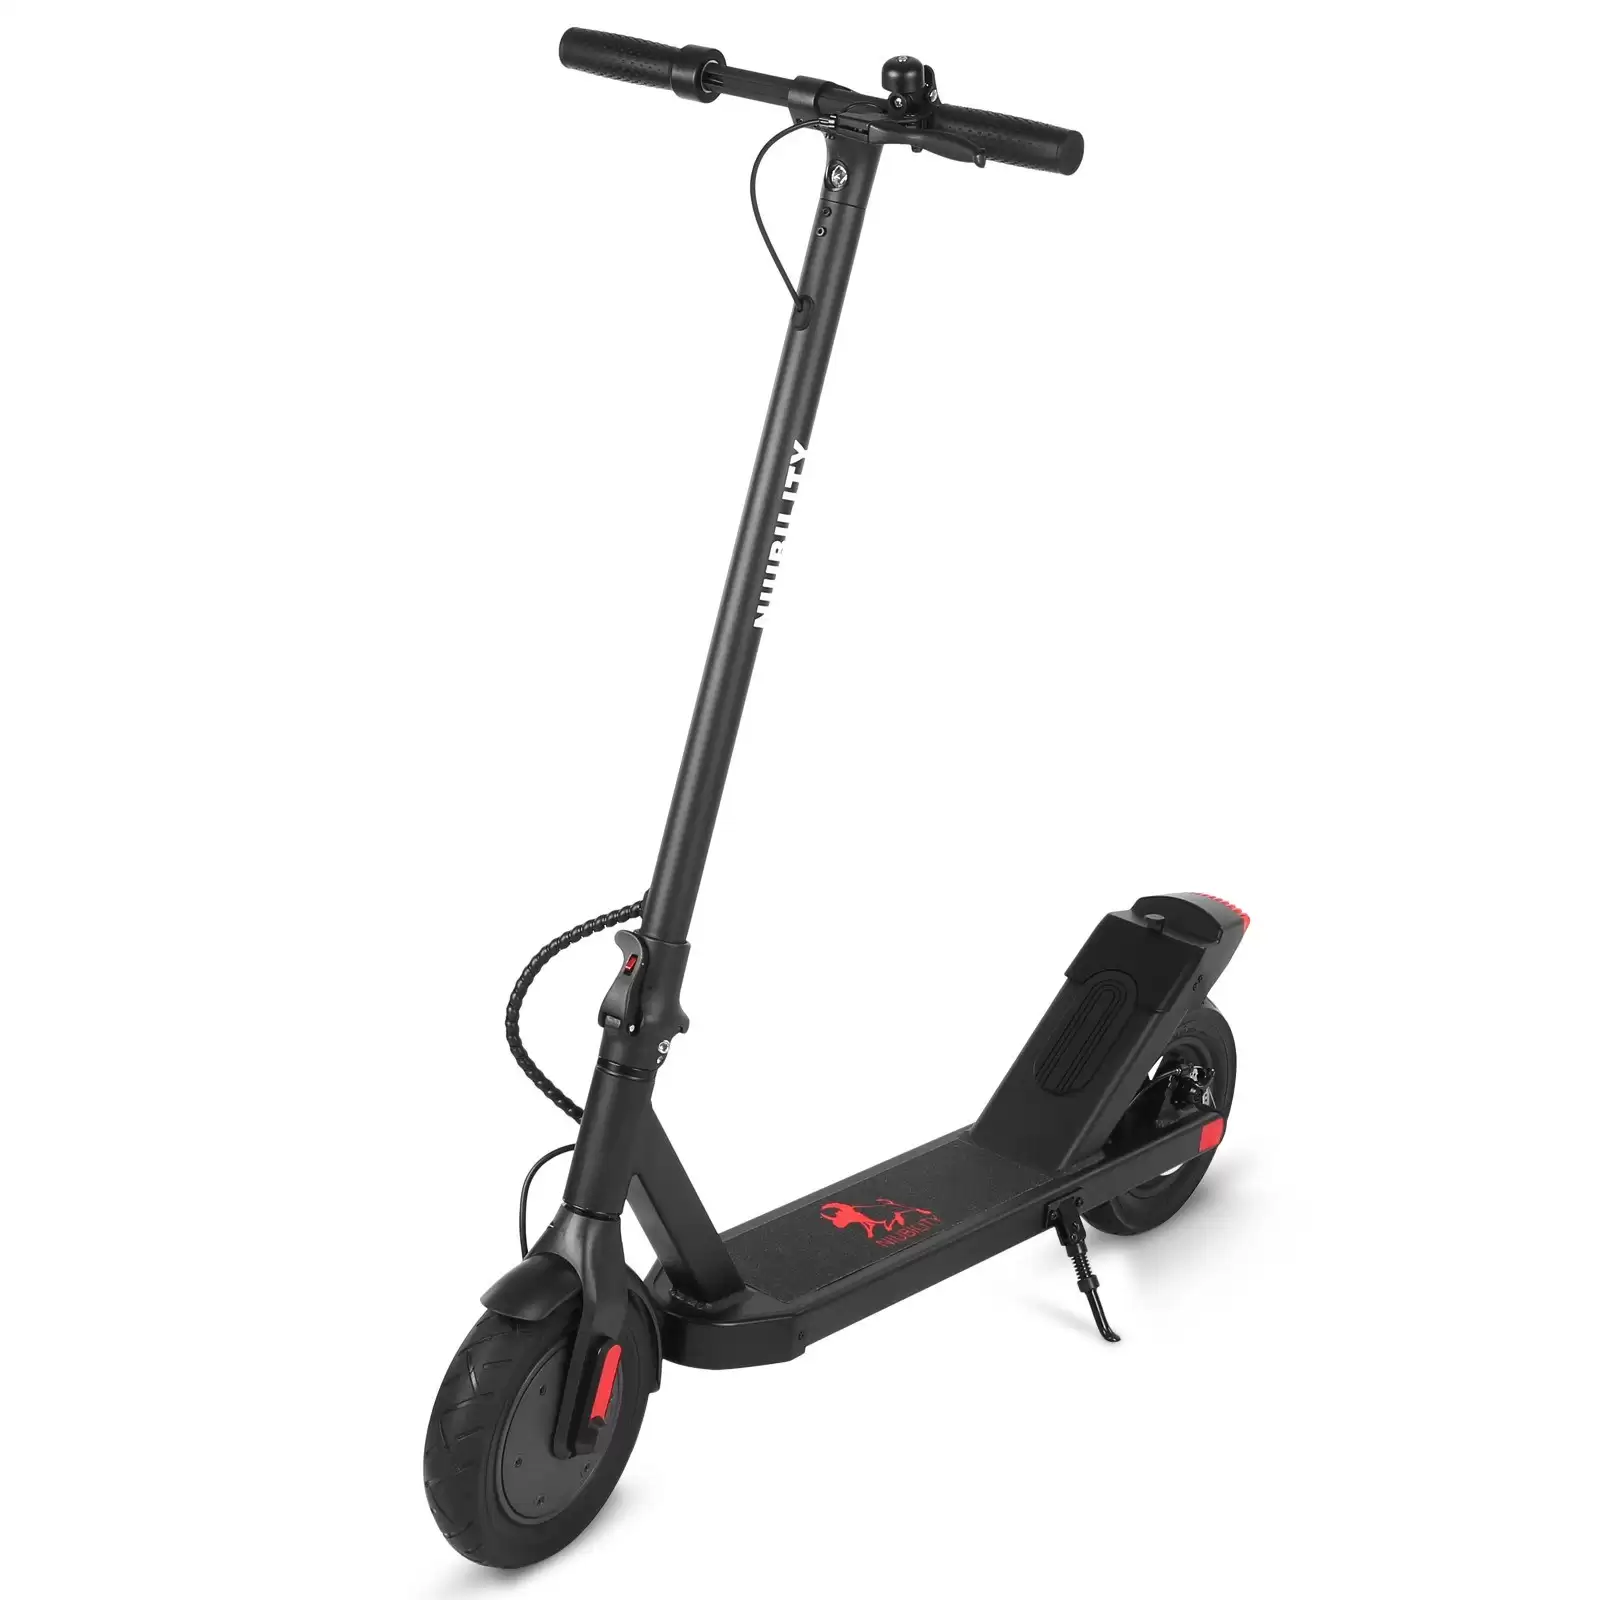 Get 48% Discount On Niubility N2 10 Inch Two Wheel Folding Electric Scooter 36v 10ah Battery, $282.34 (Inclusive Of Vat) At Tomtop